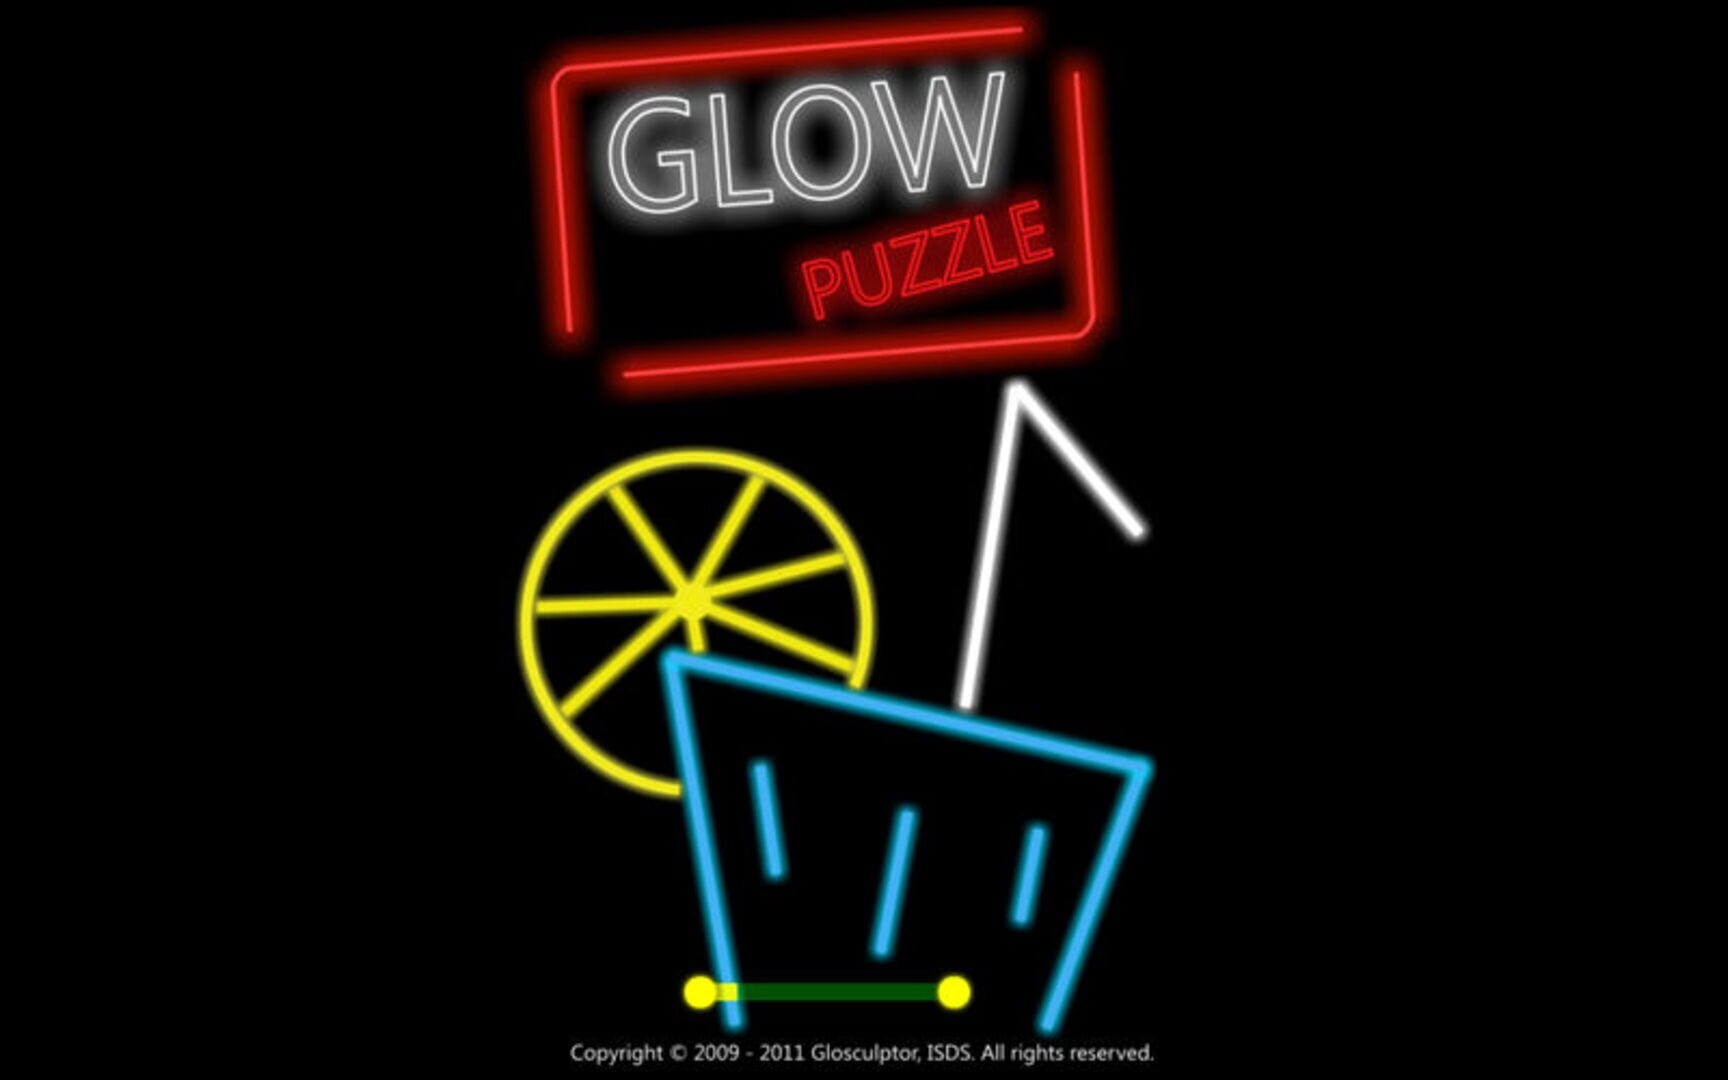 Glow Puzzle by Glosculptor